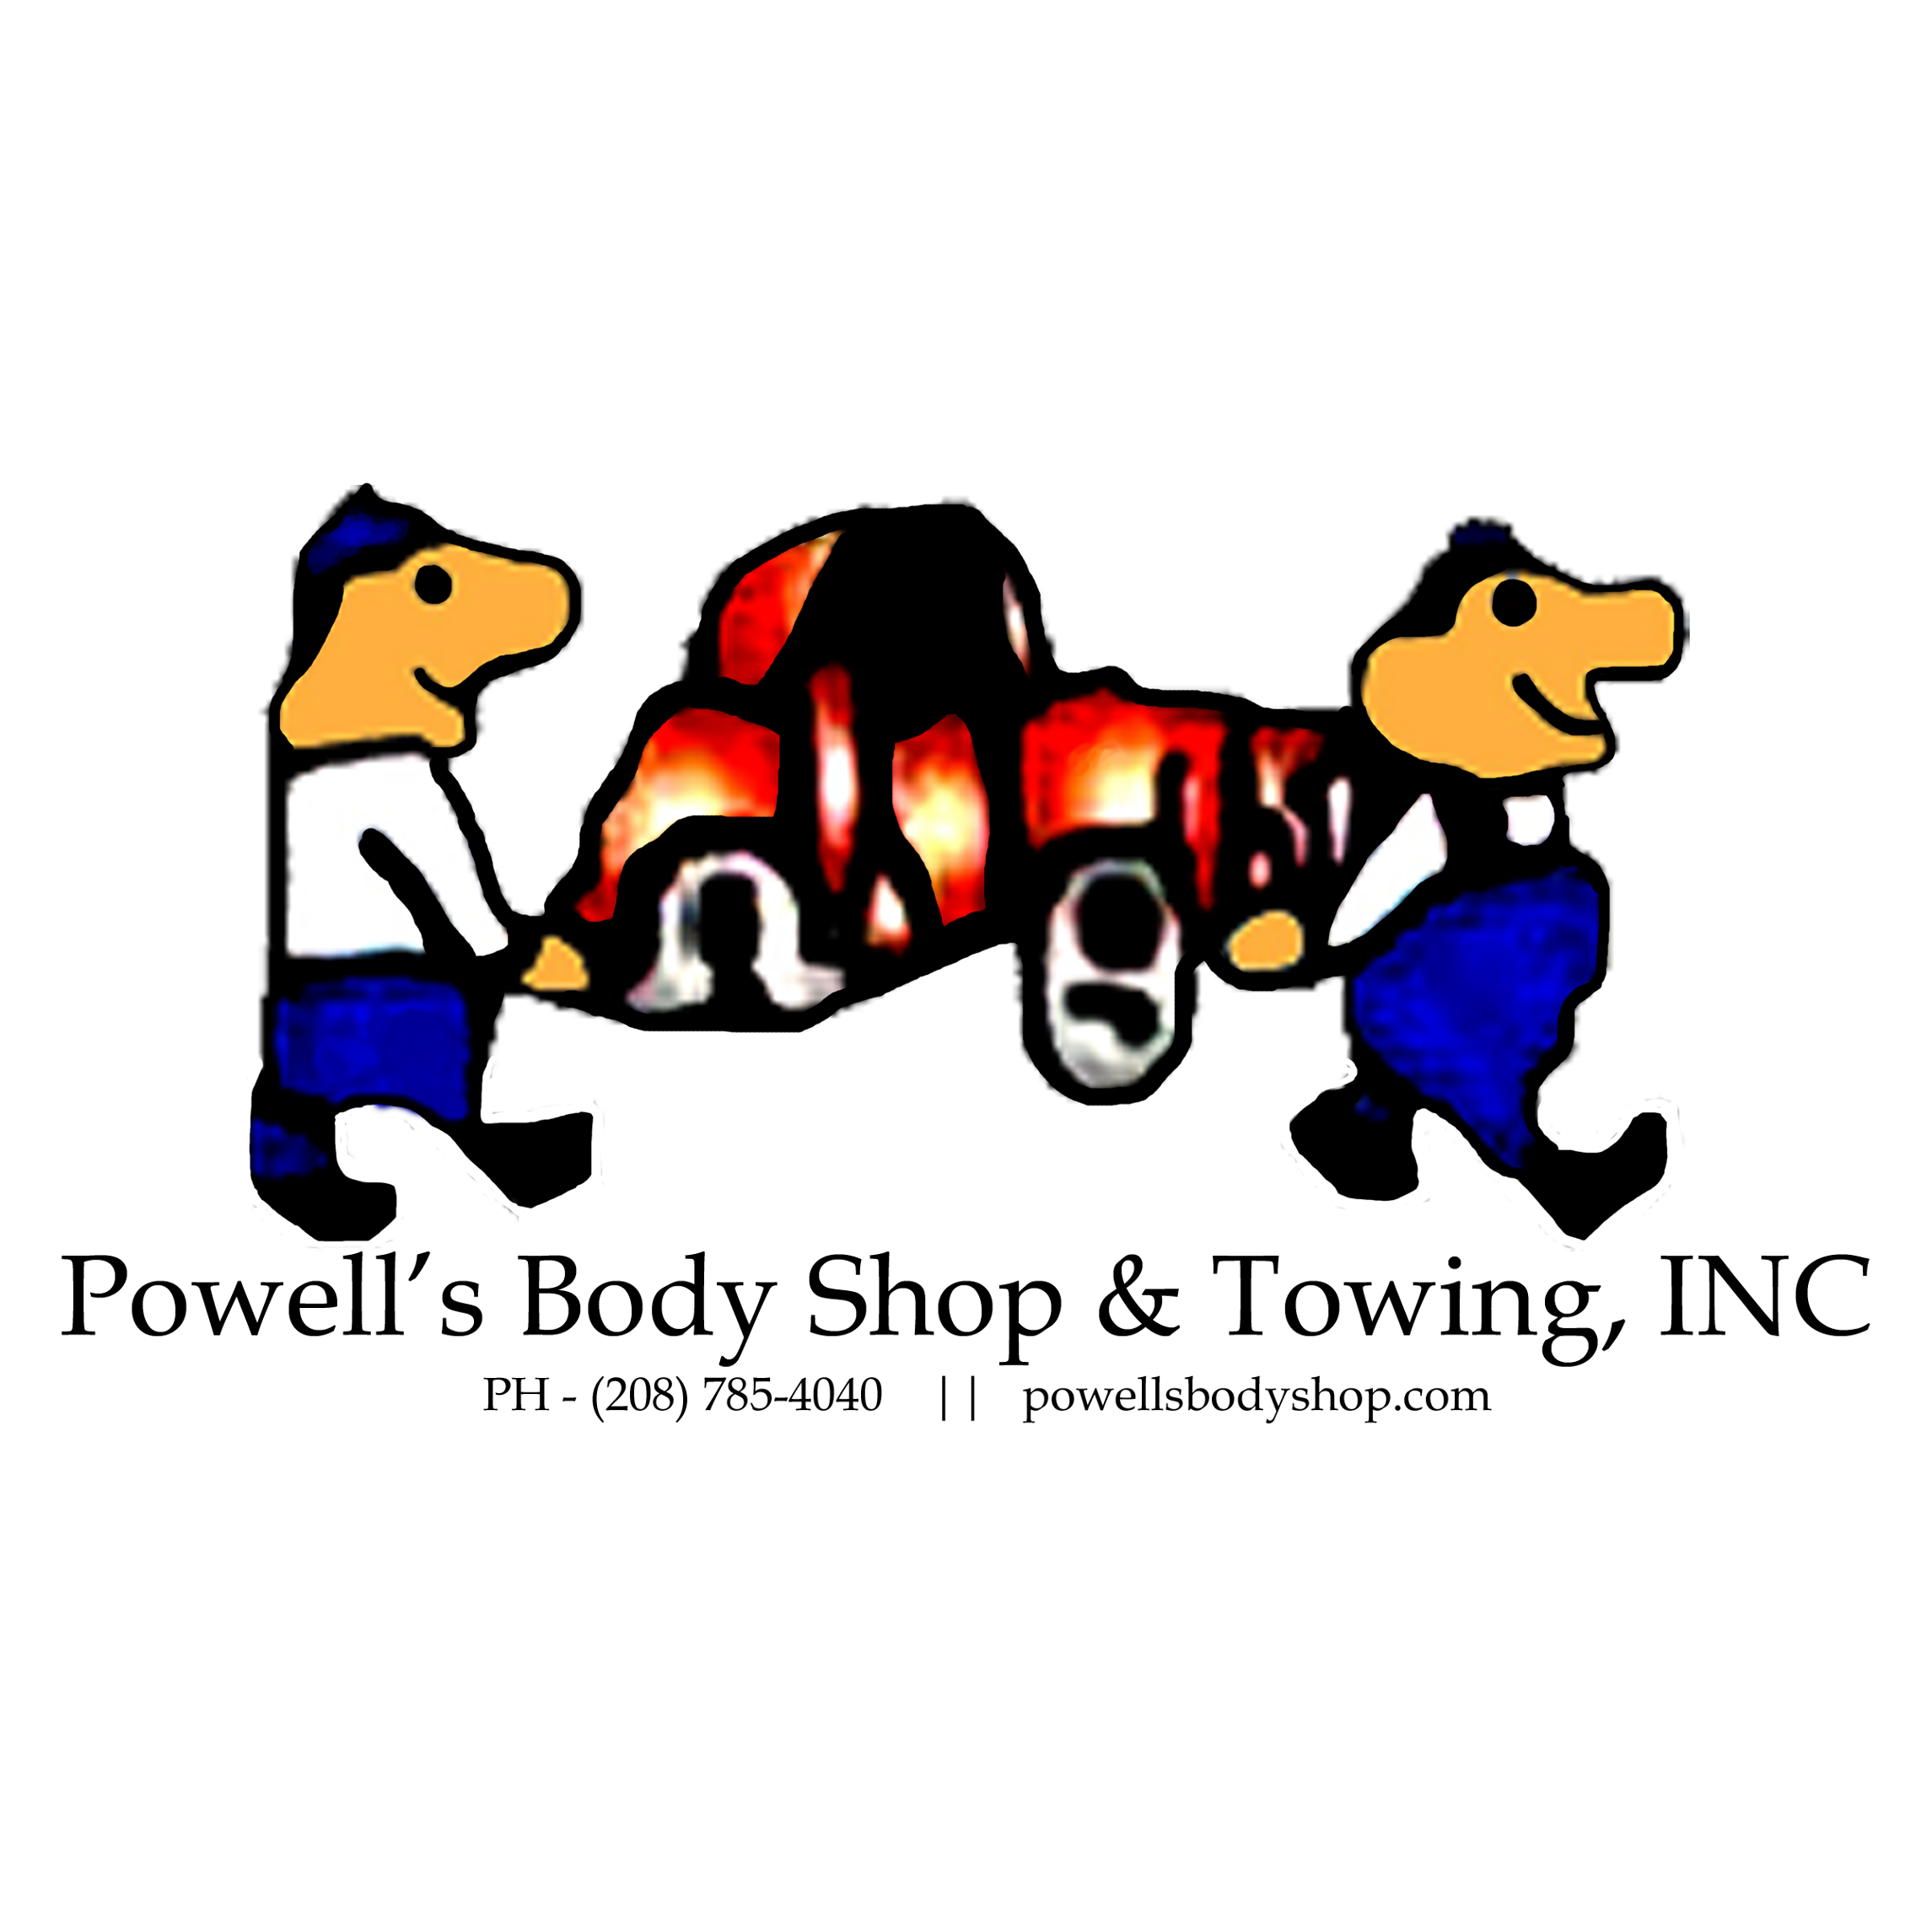 Powell’s Body Shop & Towing